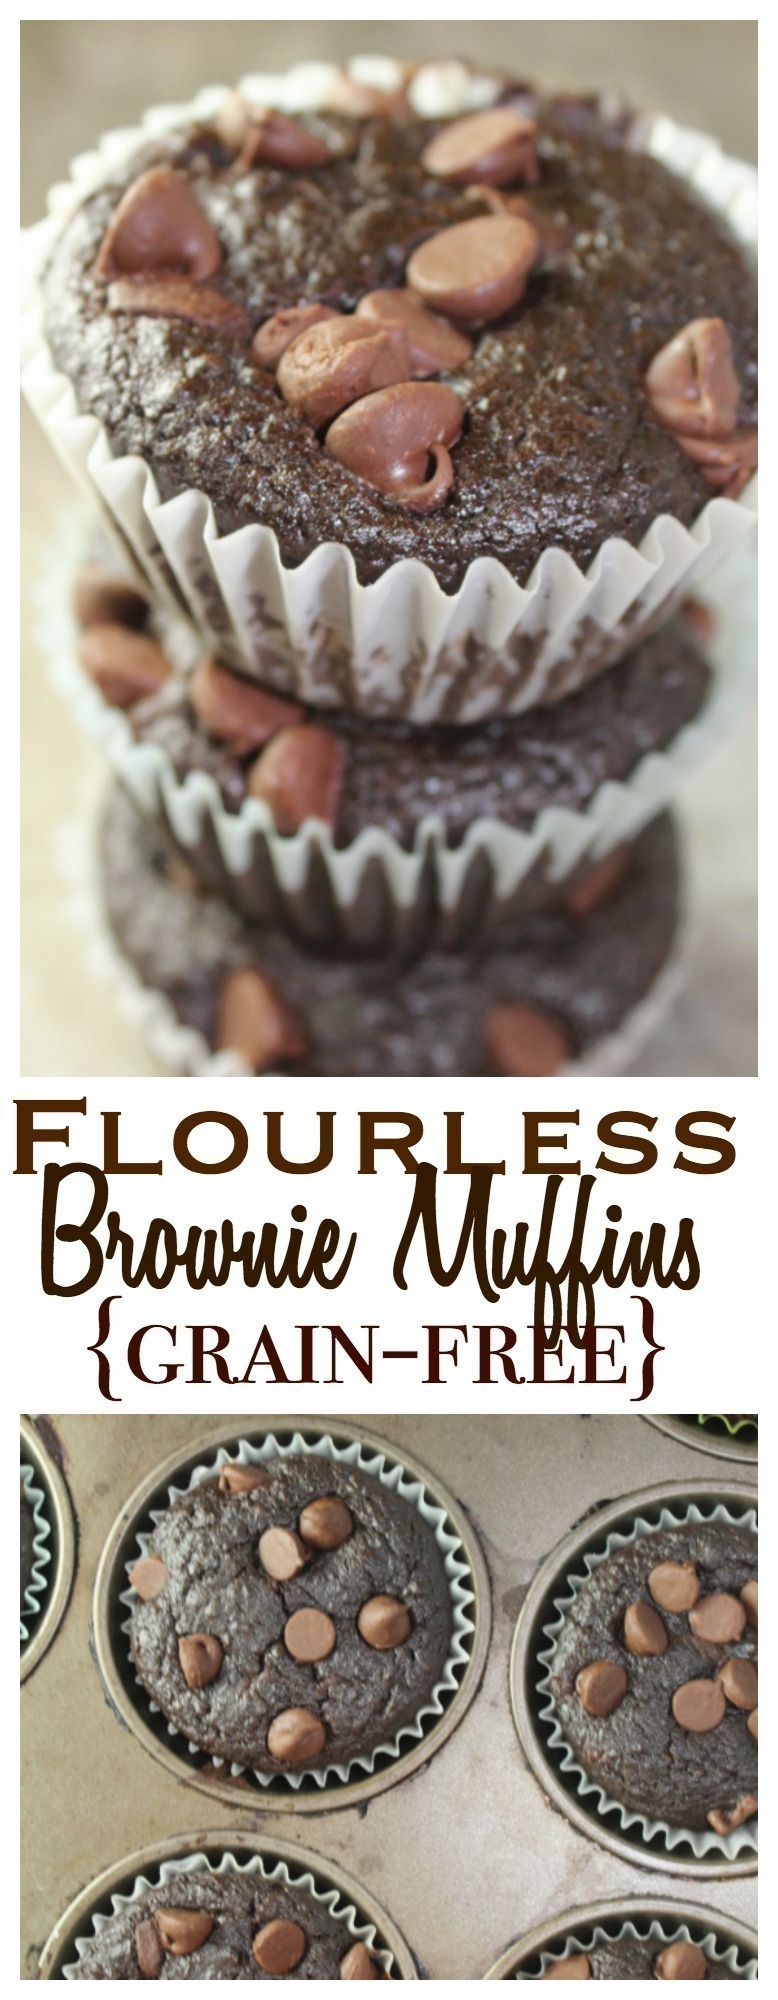 A delicious twist on regular brownies, using chickpeas and maple syrup in lieu of flour and refined sugar. They are amazing!